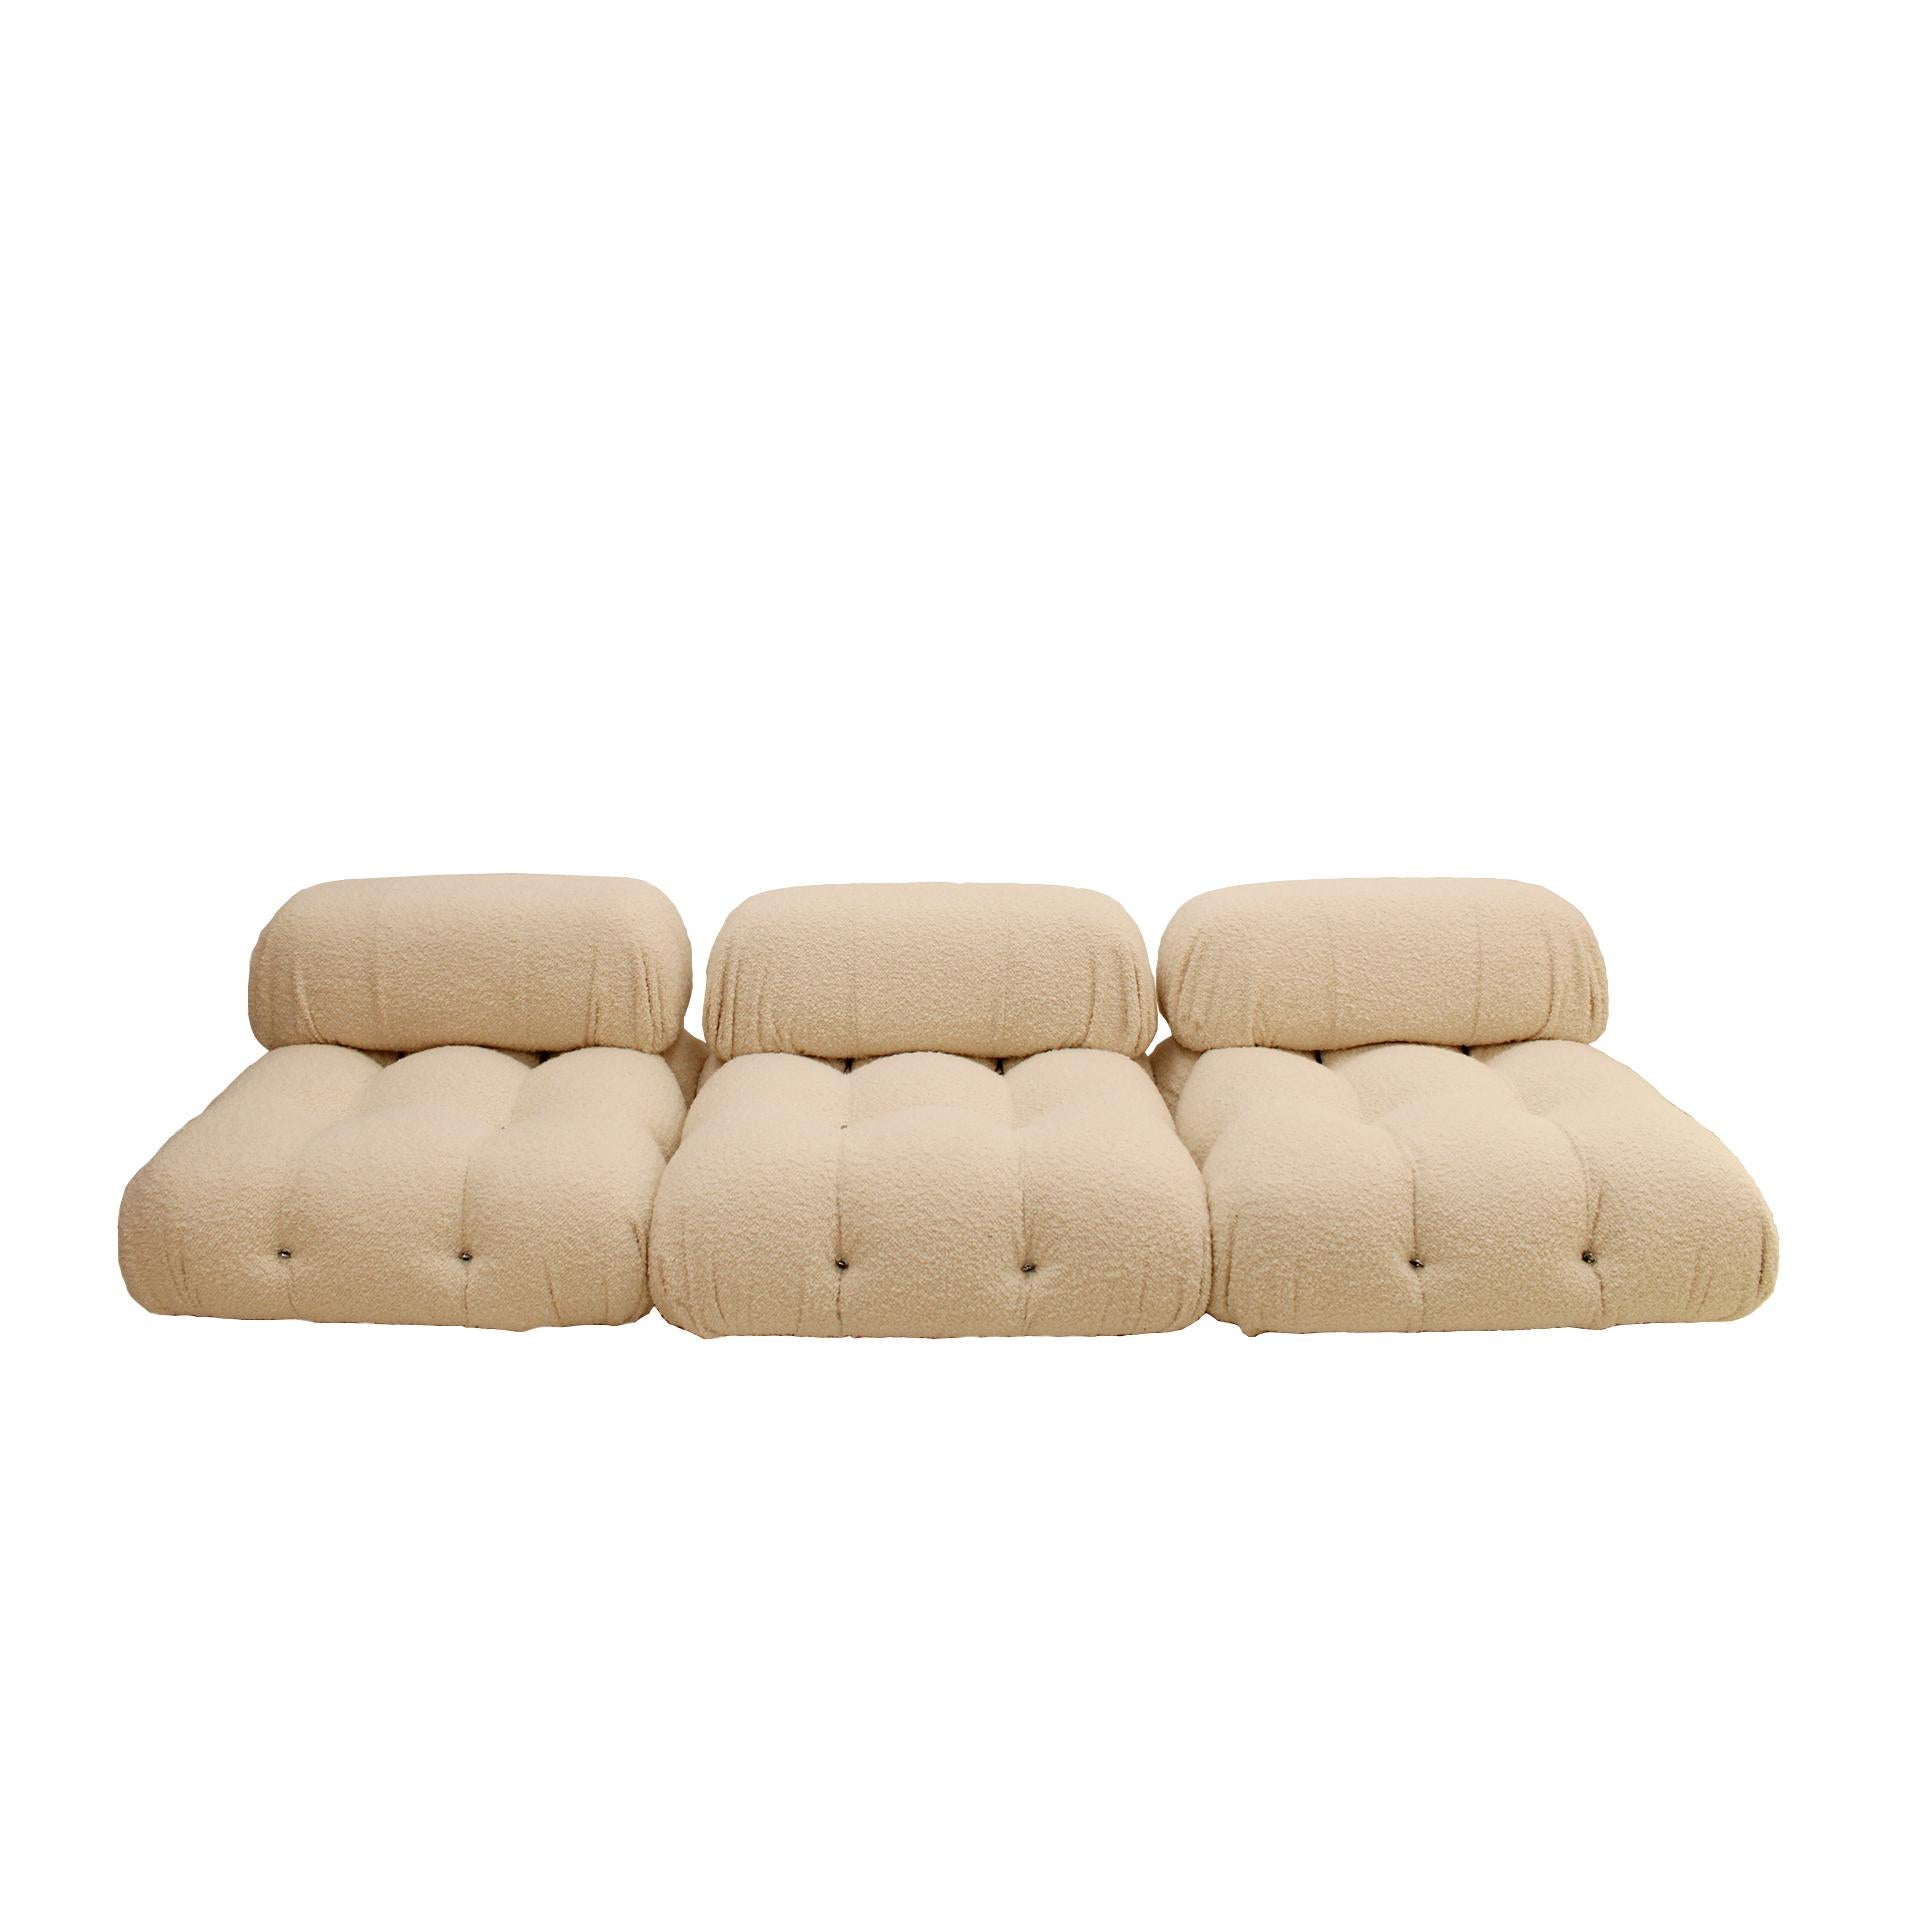 Discover unparalleled comfort and versatility with the iconic Camaleonda Modular Sofa, a timeless masterpiece designed by Mario Bellini for C&B Italia in 1972. Crafted to perfection, this sofa redefines modular seating with its innovative design and